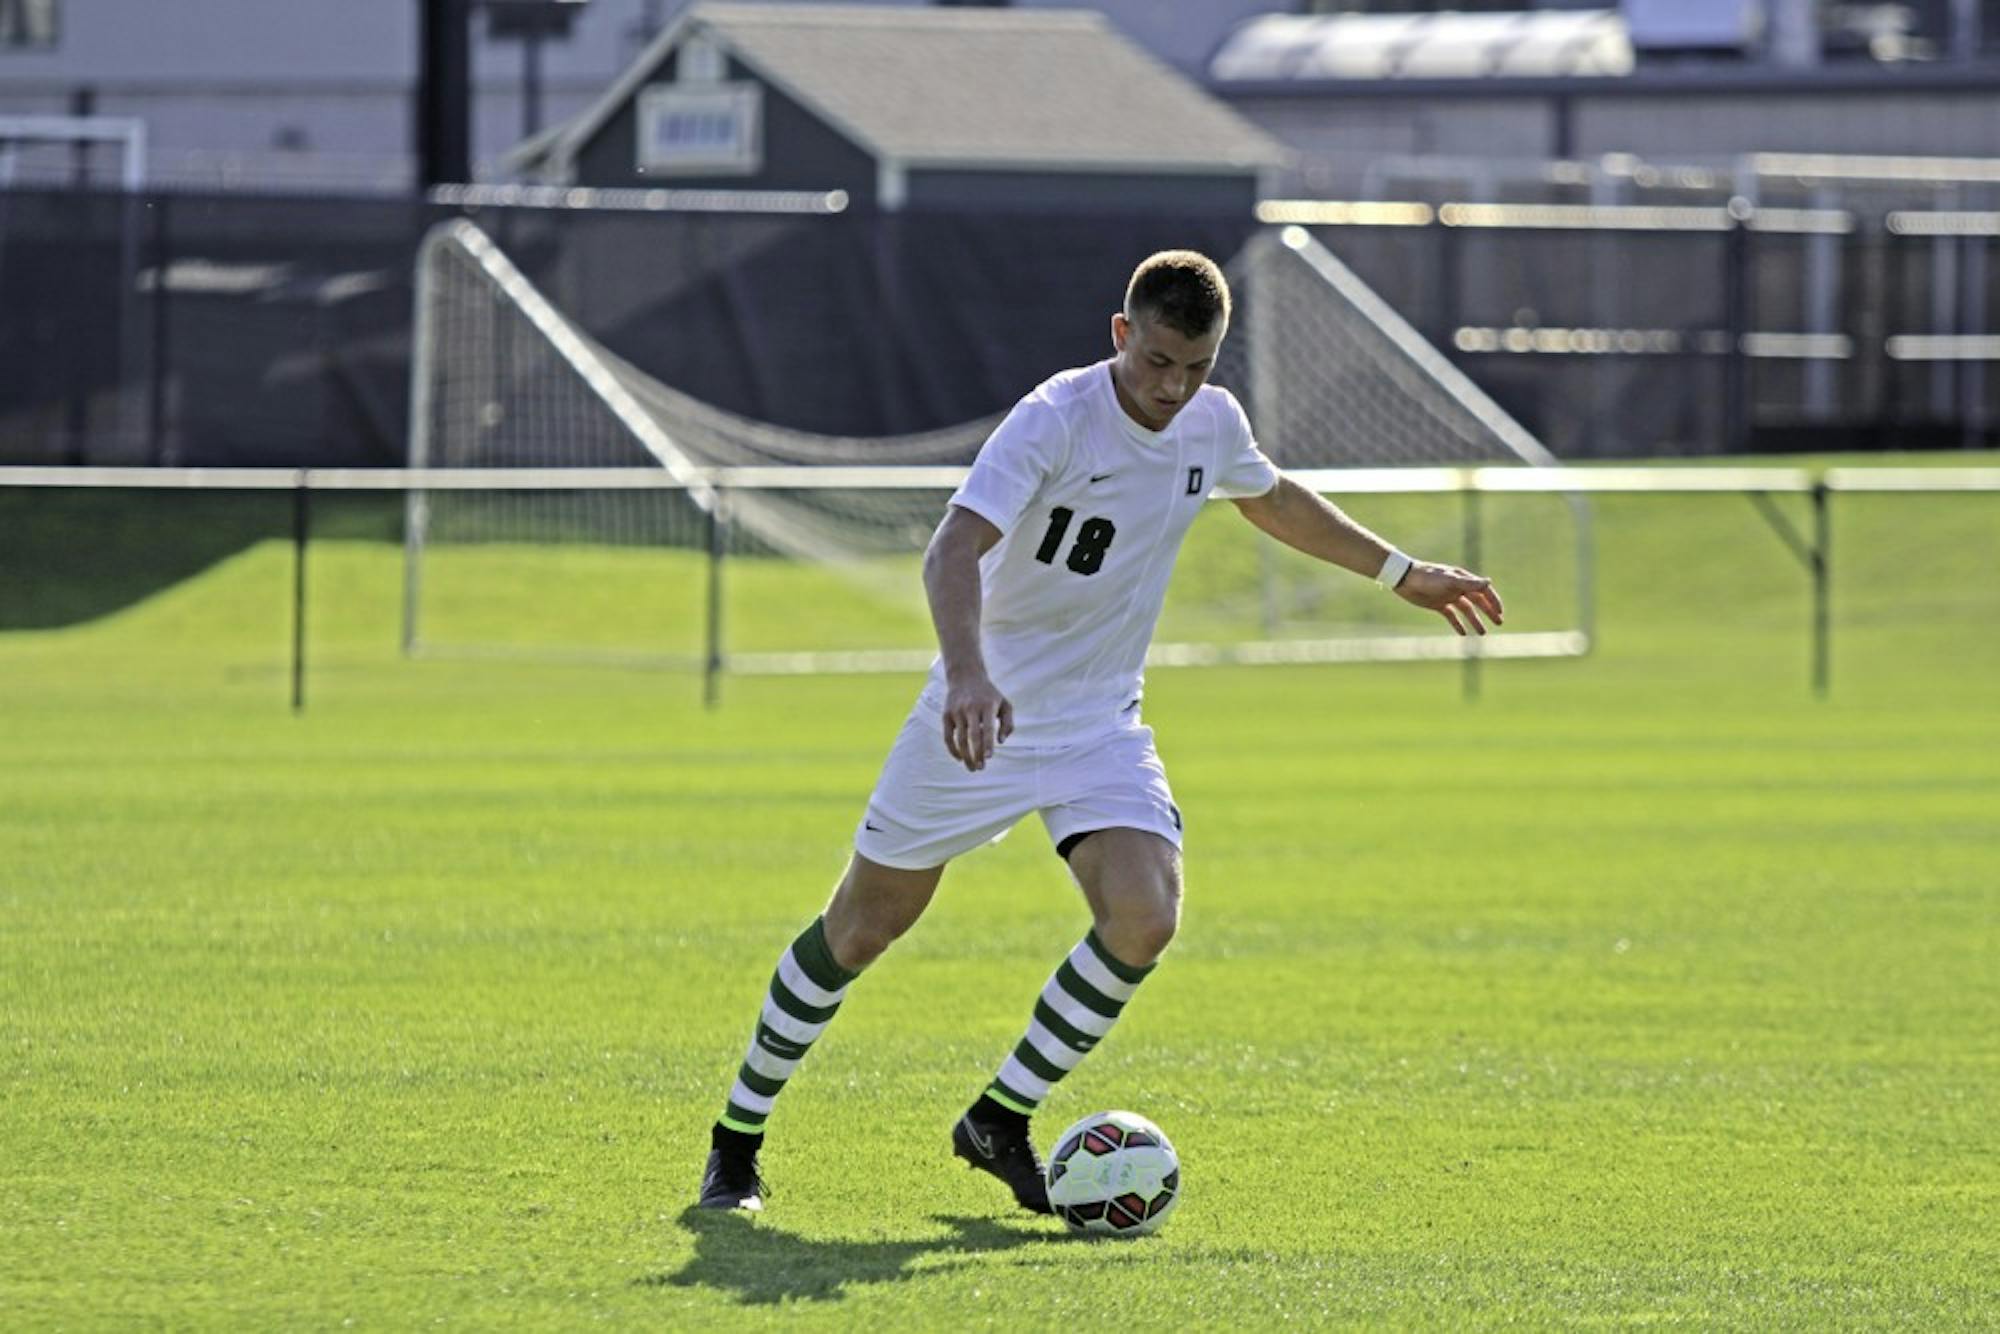 The men’s soccer team hopes to extend its unbeaten streak to five against UVM this afternoon.